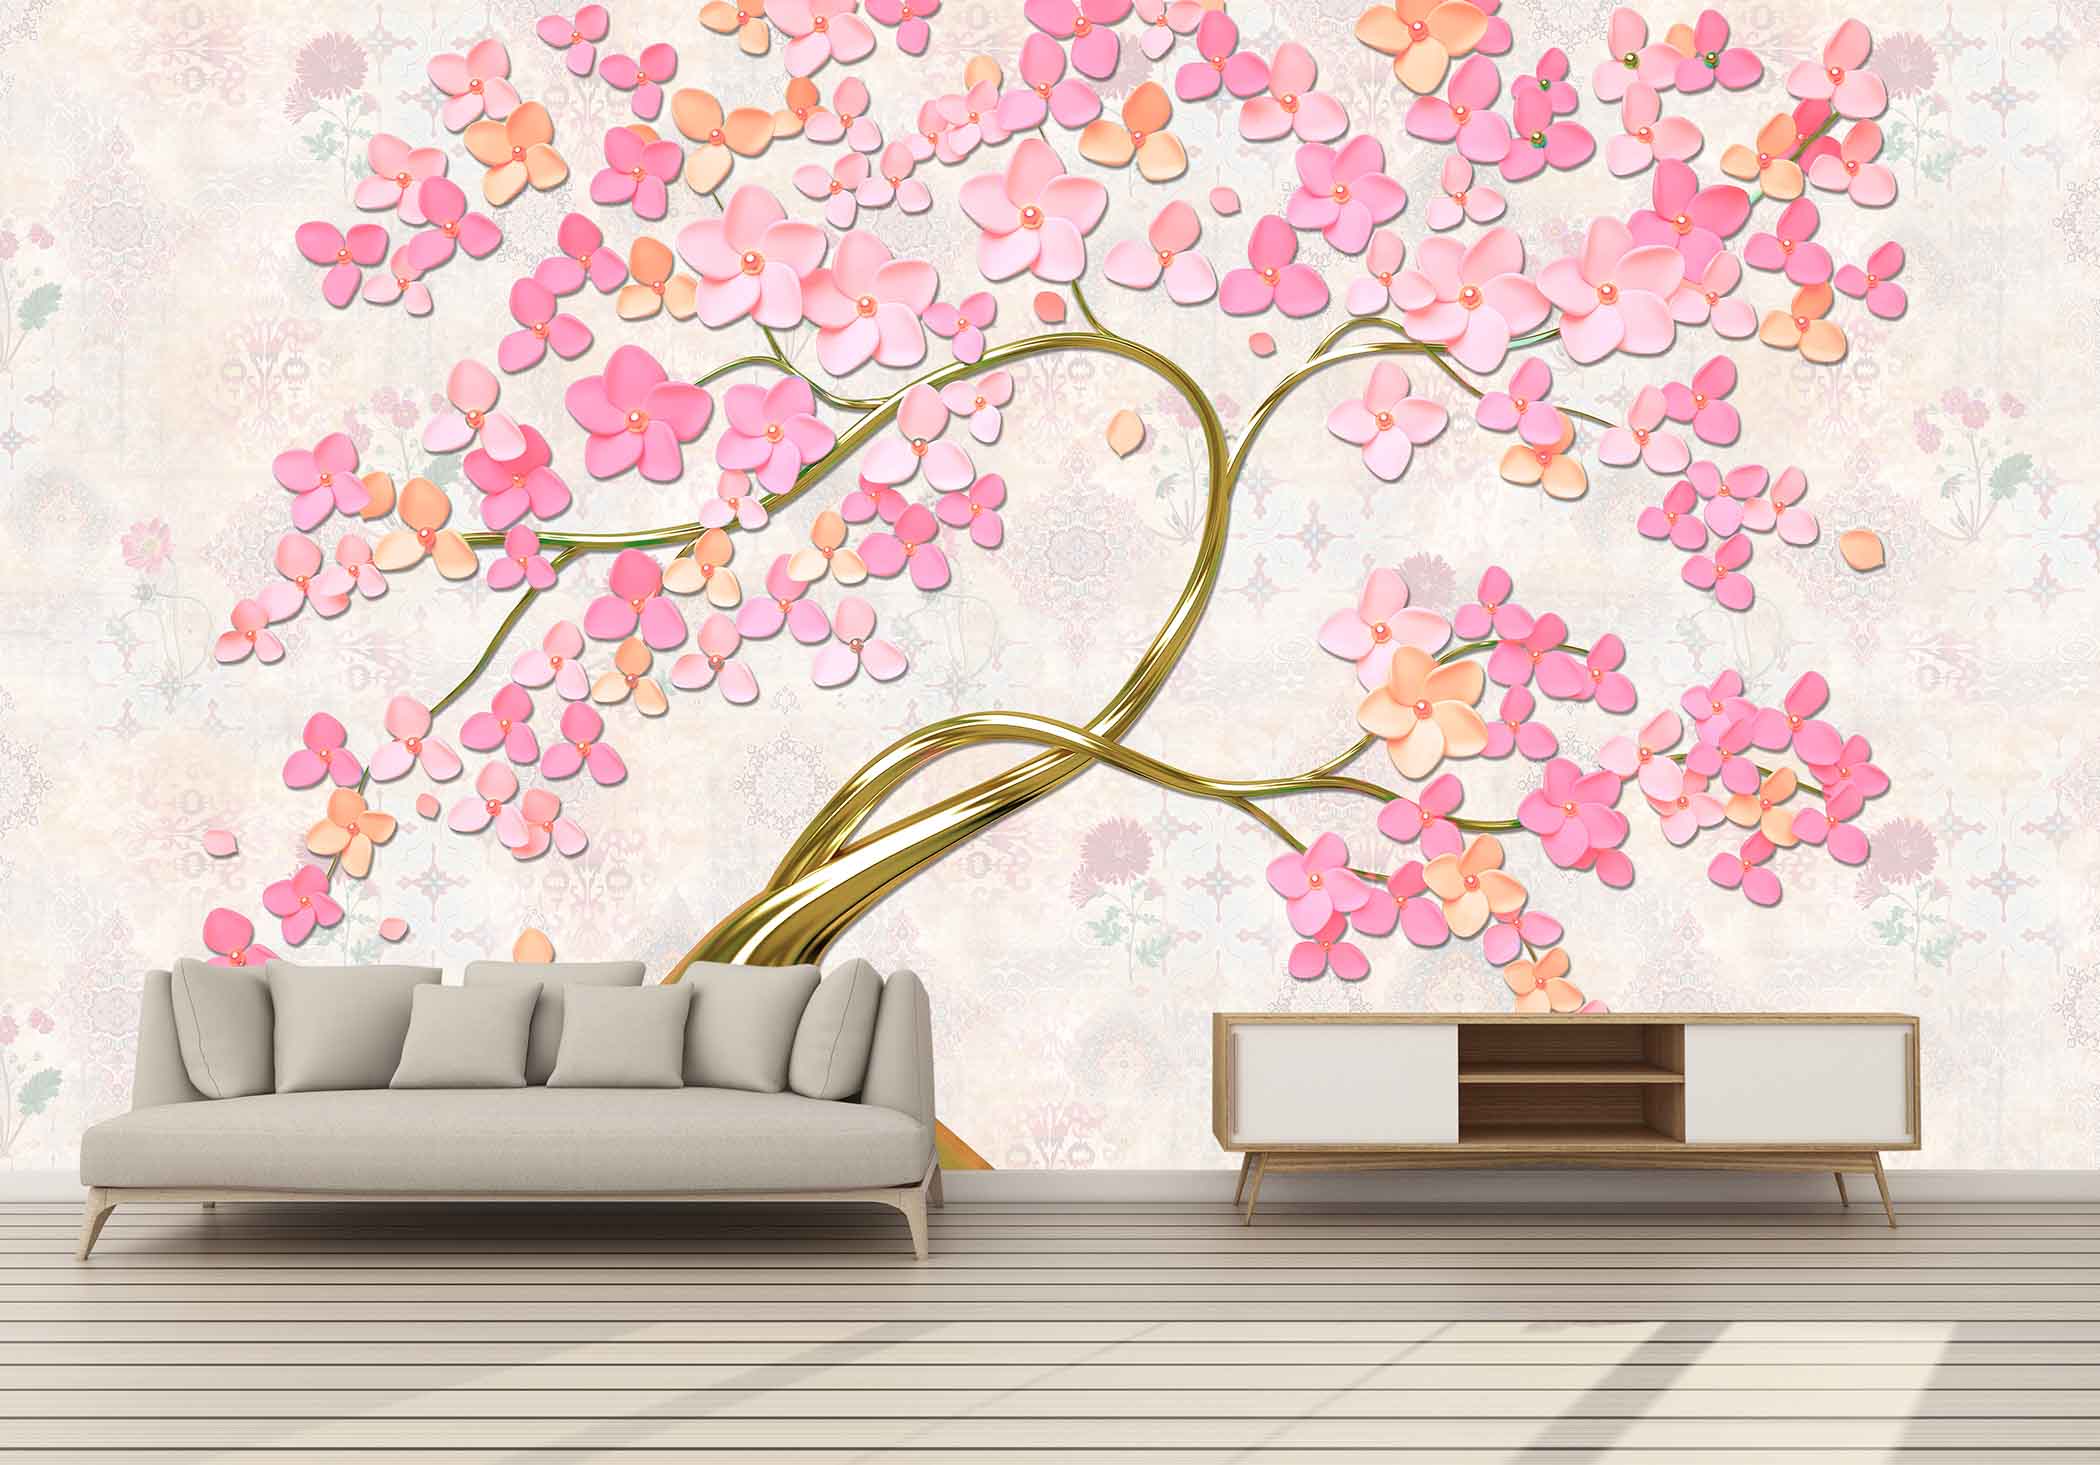 Beauteous Floral wallpaper in HD Digital Print to give a rich look to